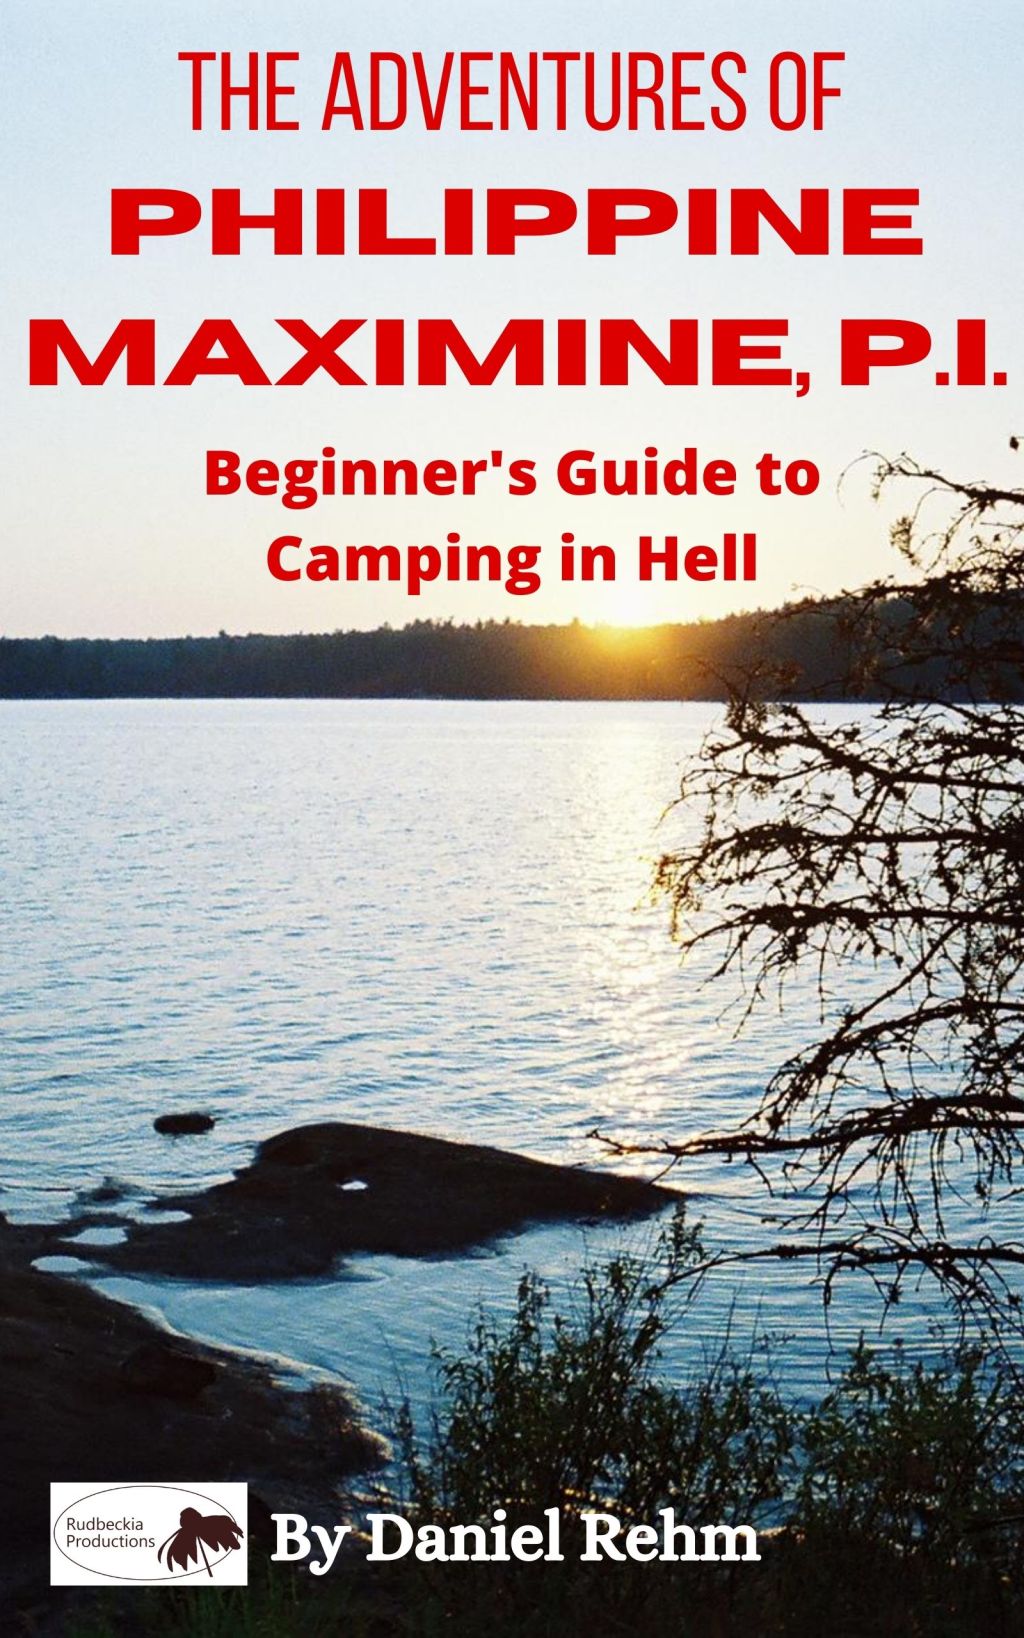 Series 1 of The Adventures of Philippine Maximine, P.I. now available on Amazon